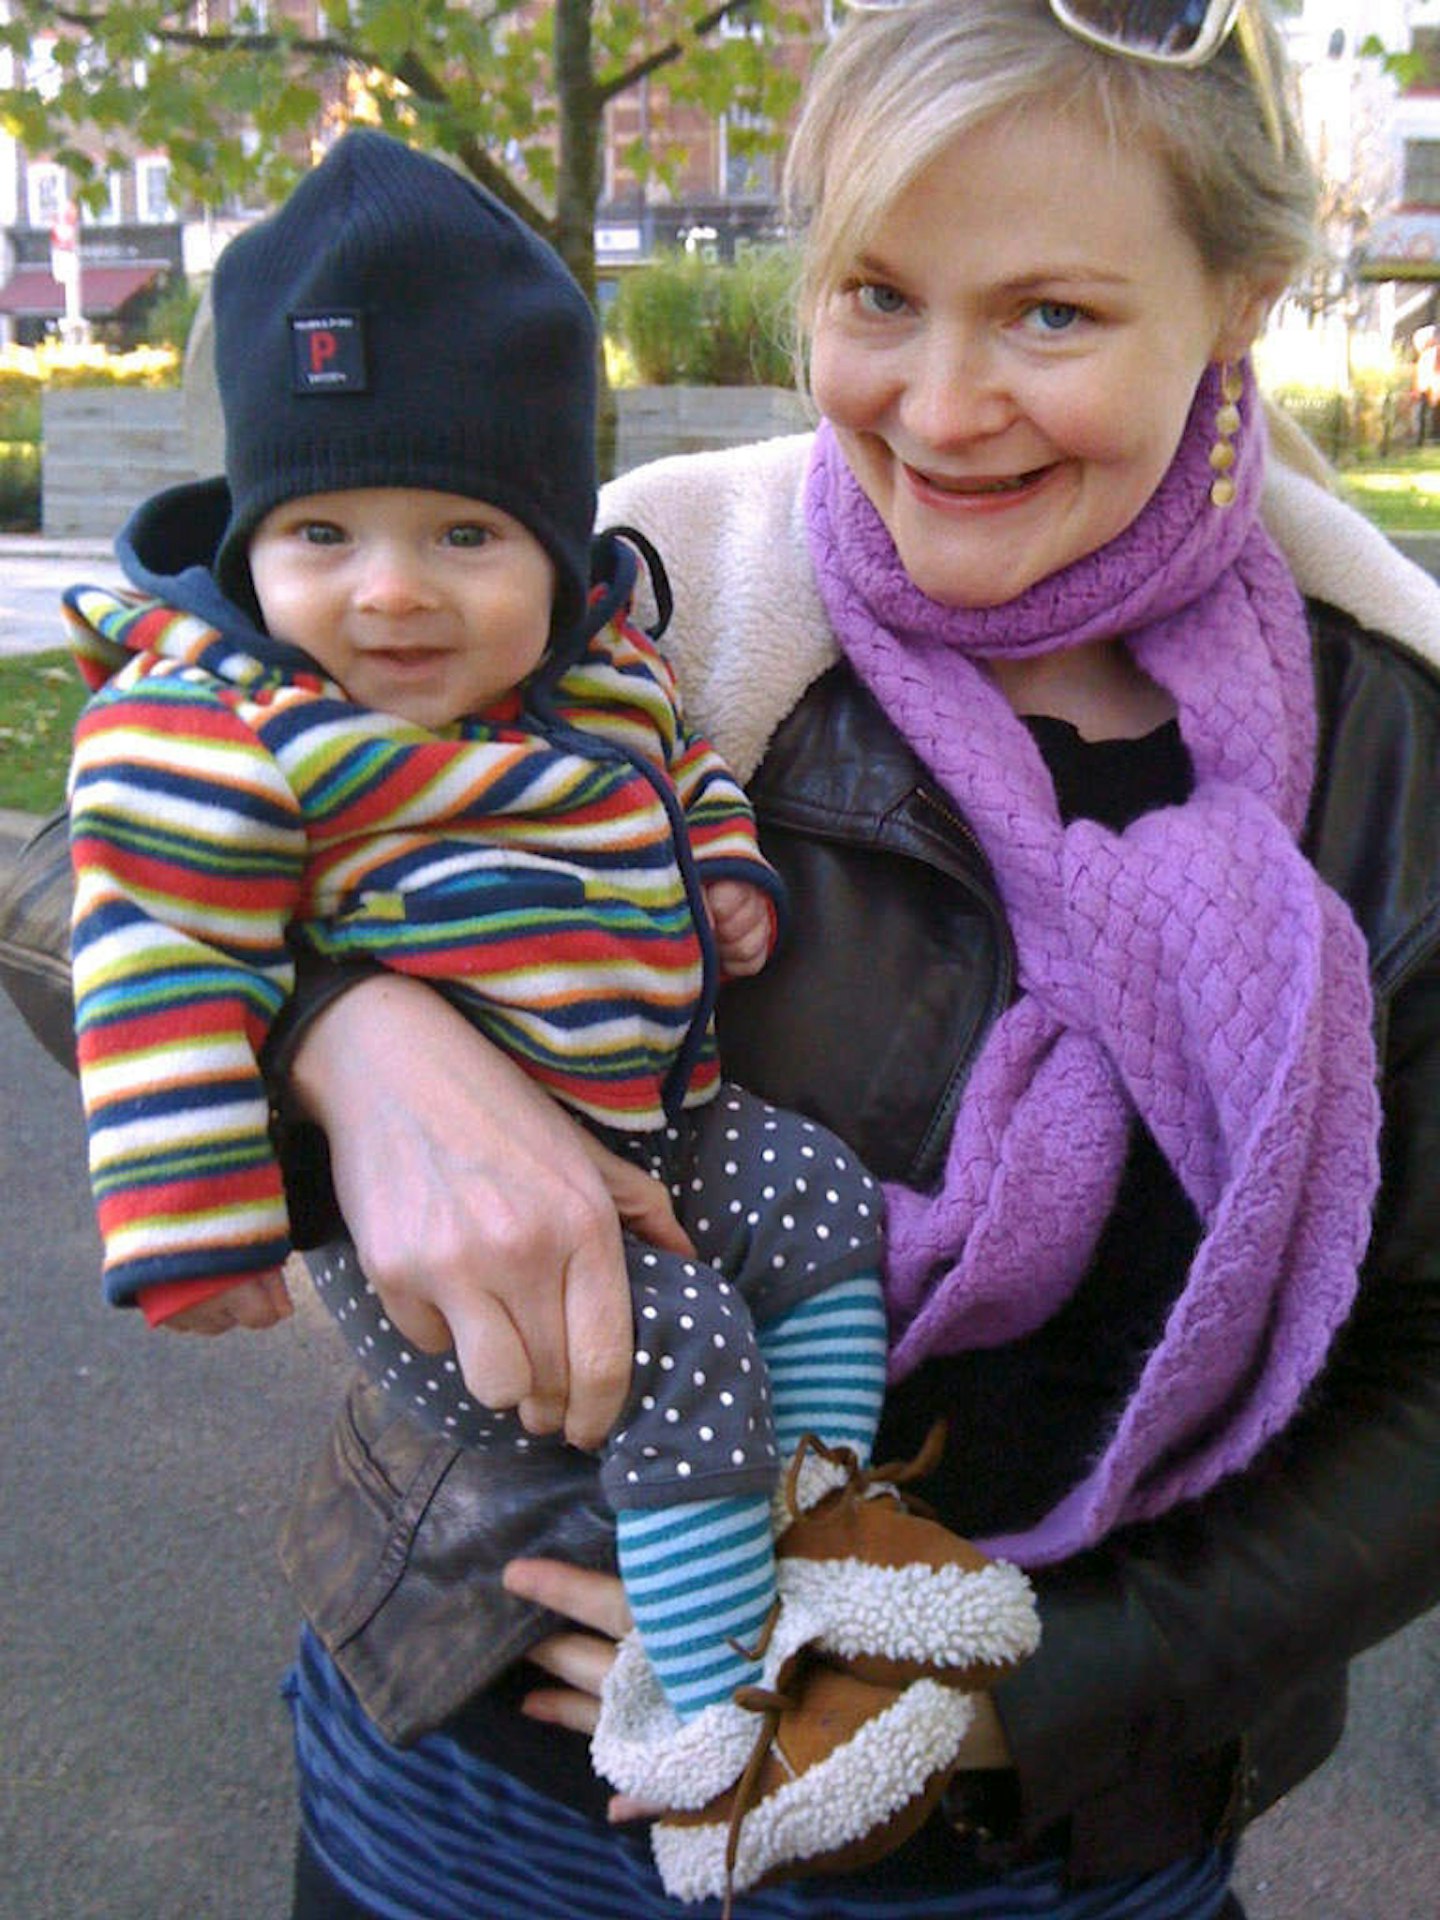 Victoria Young and Baby 3